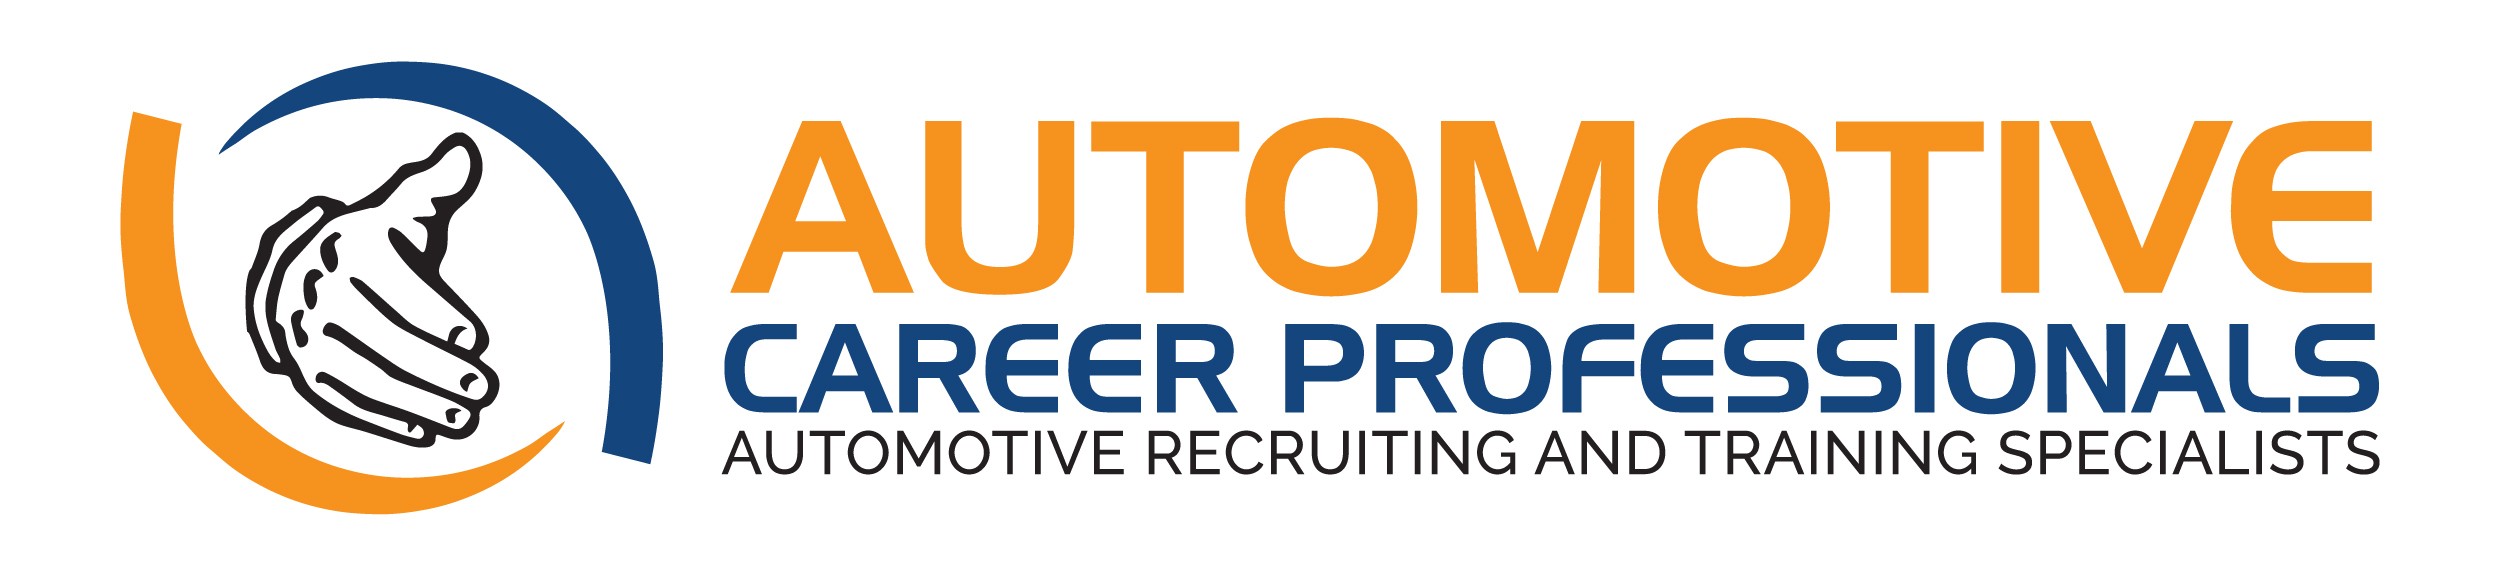 Automotive Career Professionals Careers And Current Employee Profiles Find Referrals Linkedin